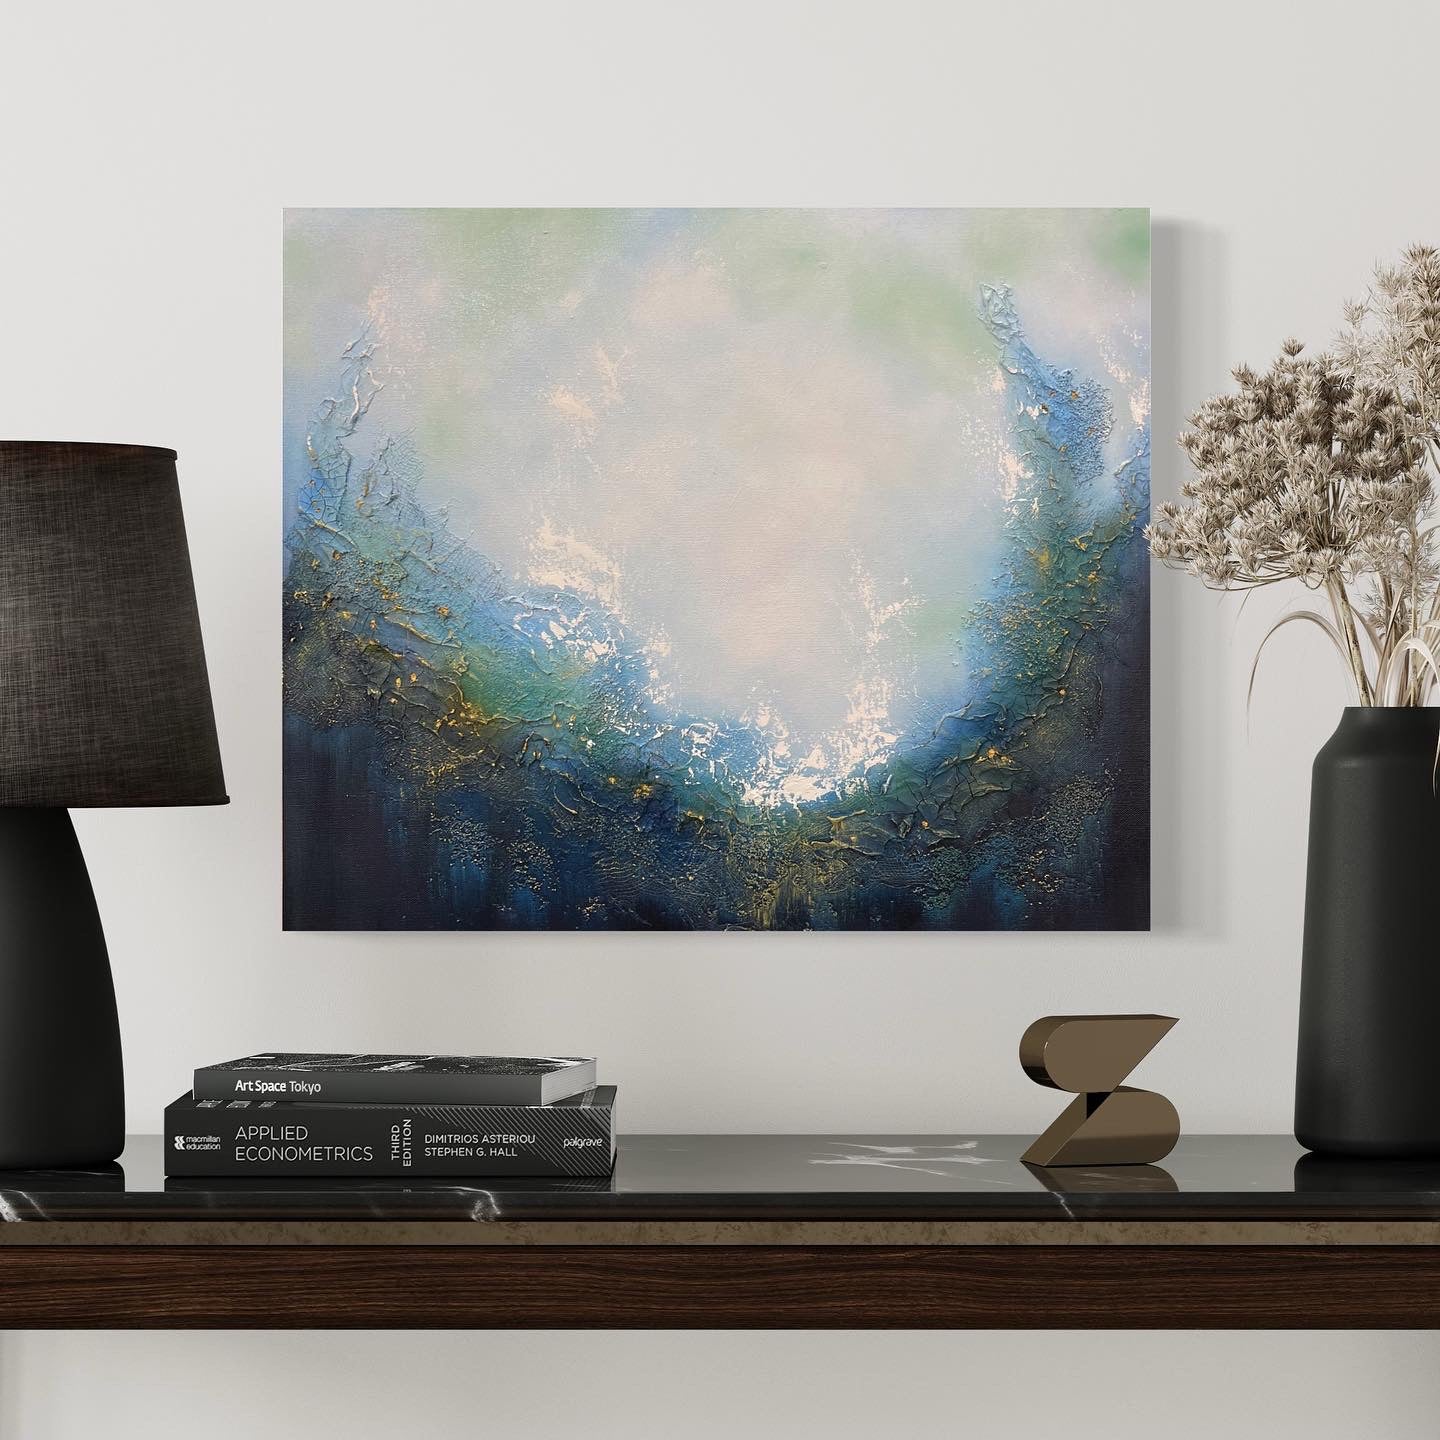 This stunning original abstract painting evokes a feeling of soulful peace and beckons a return to your spiritual center. Dive in and explore this portal which invites personal reflection with its powerful imagery of a magical portal opening up to a realm of endless possibilities.  Painting hangs over a table with books and a black lamp.